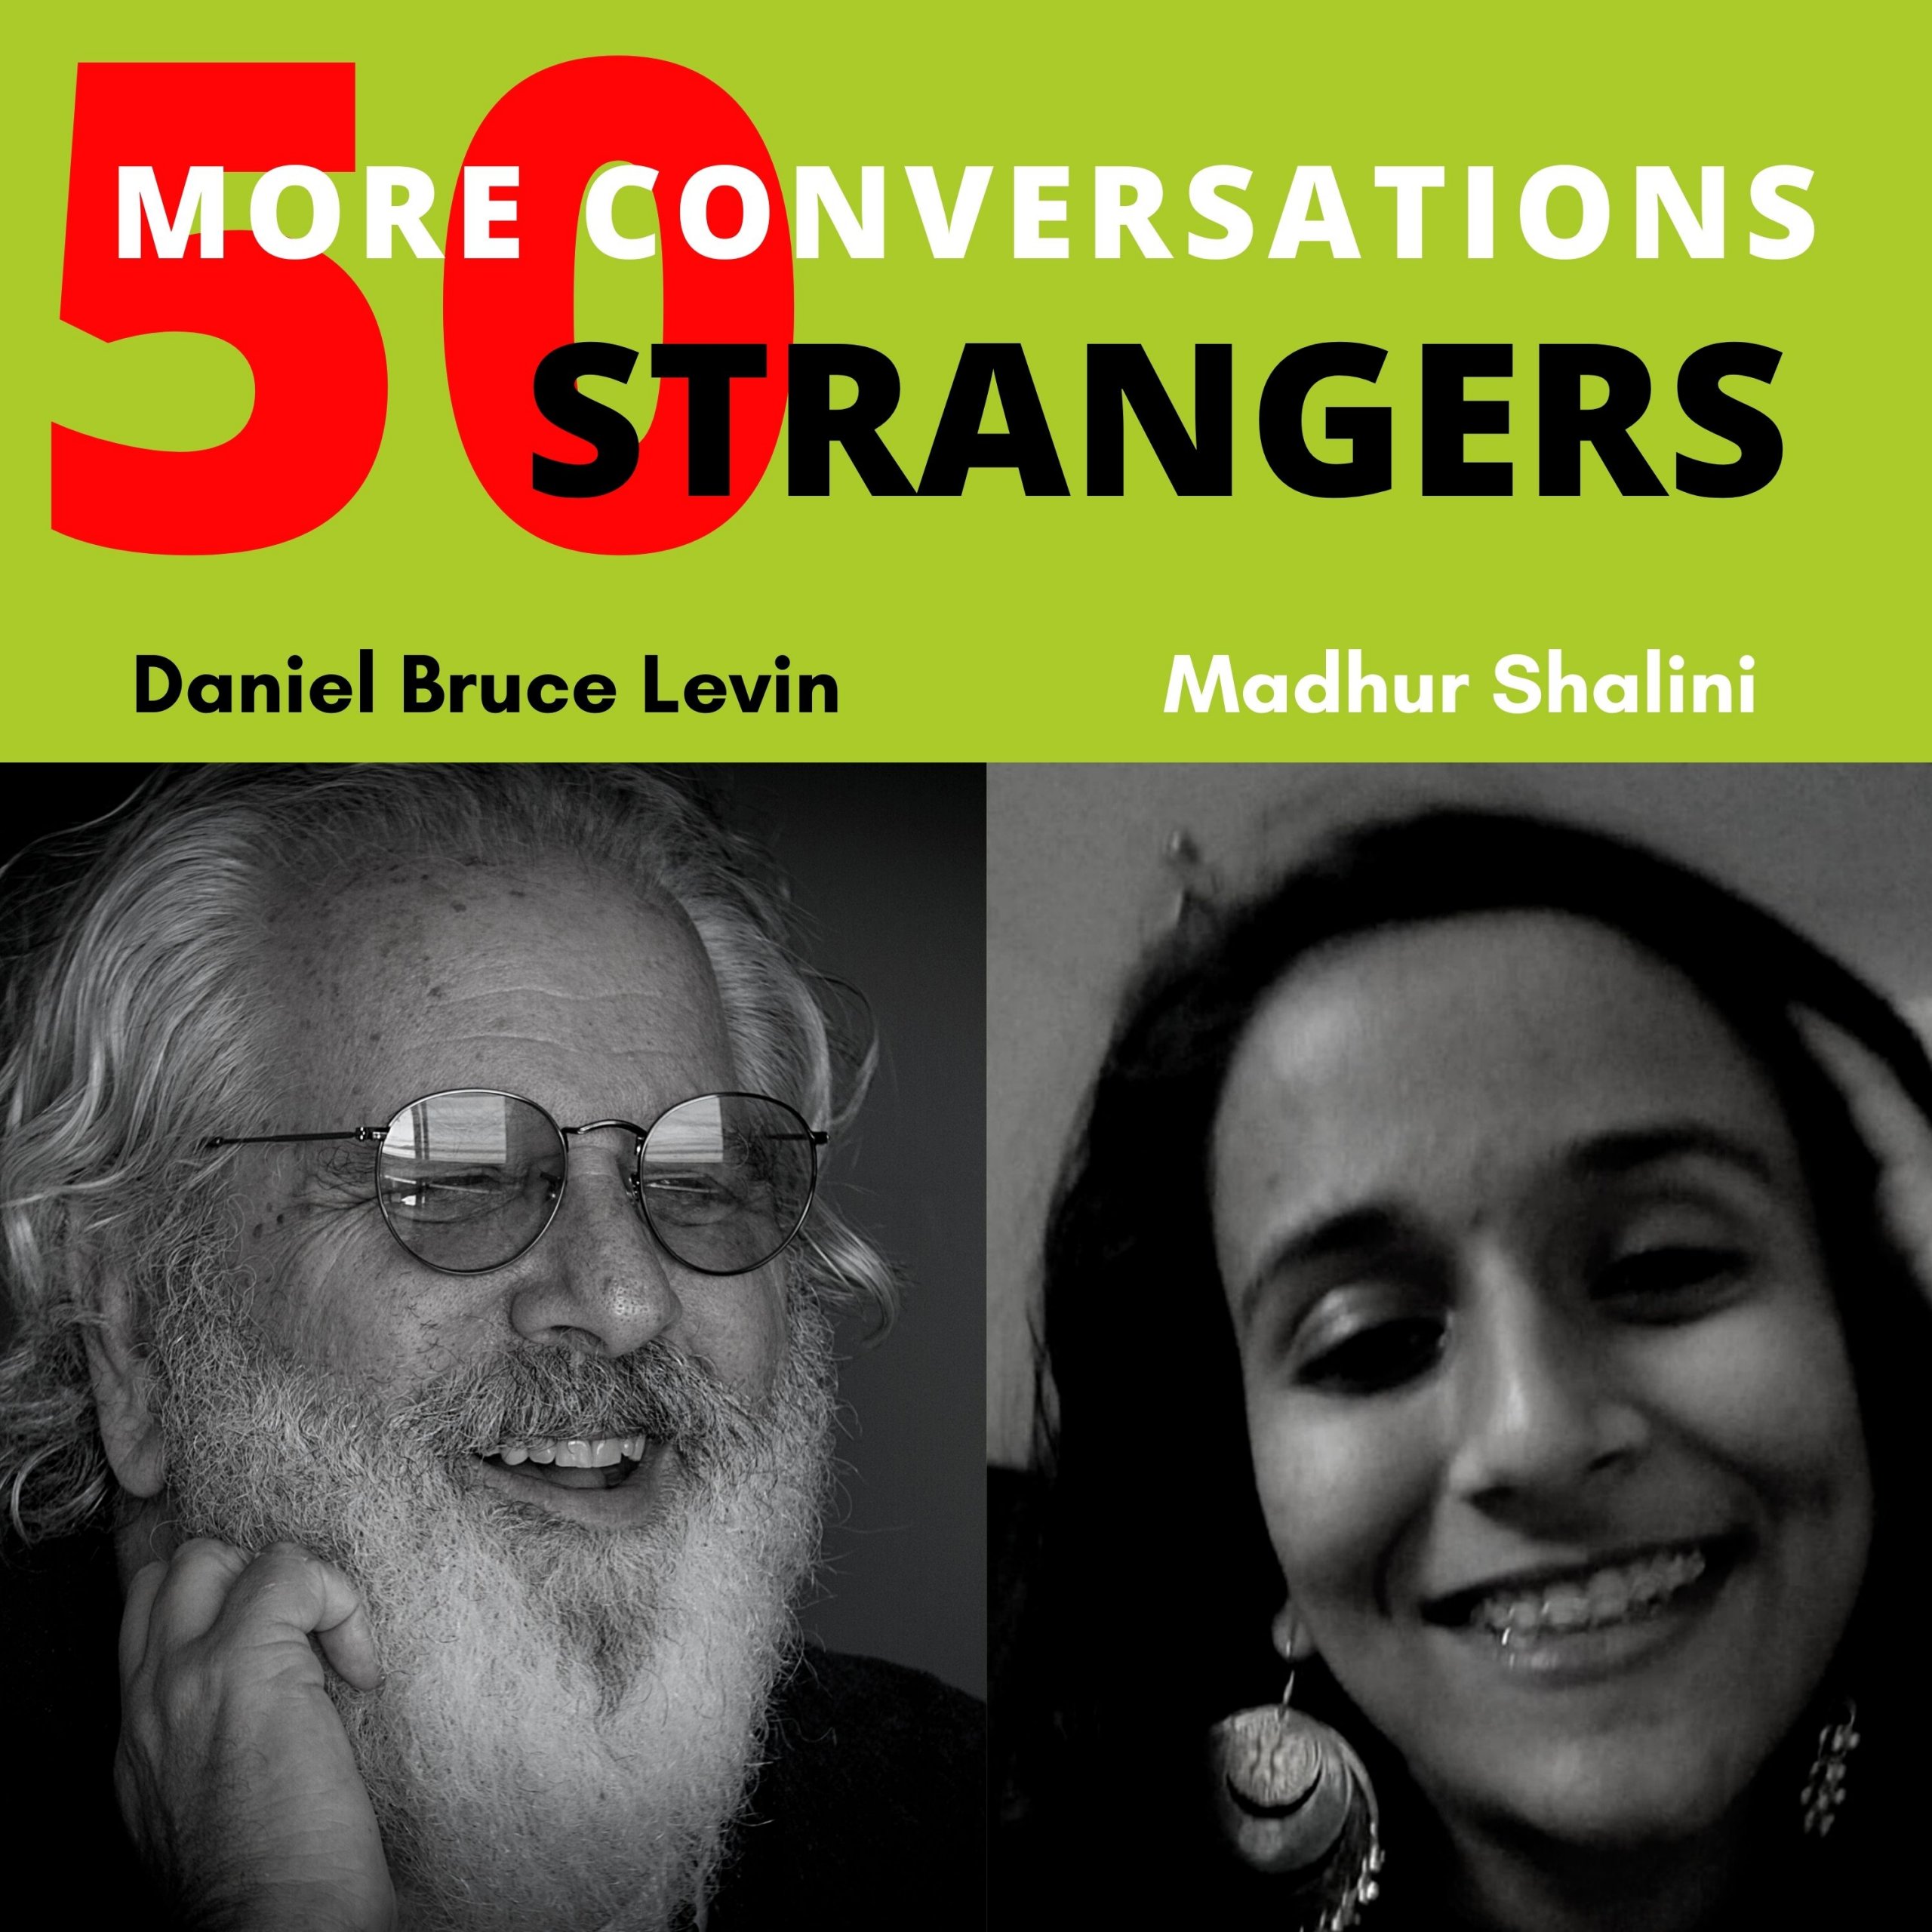 50 More Conversations with 50 More Strangers with Madhur Shalini